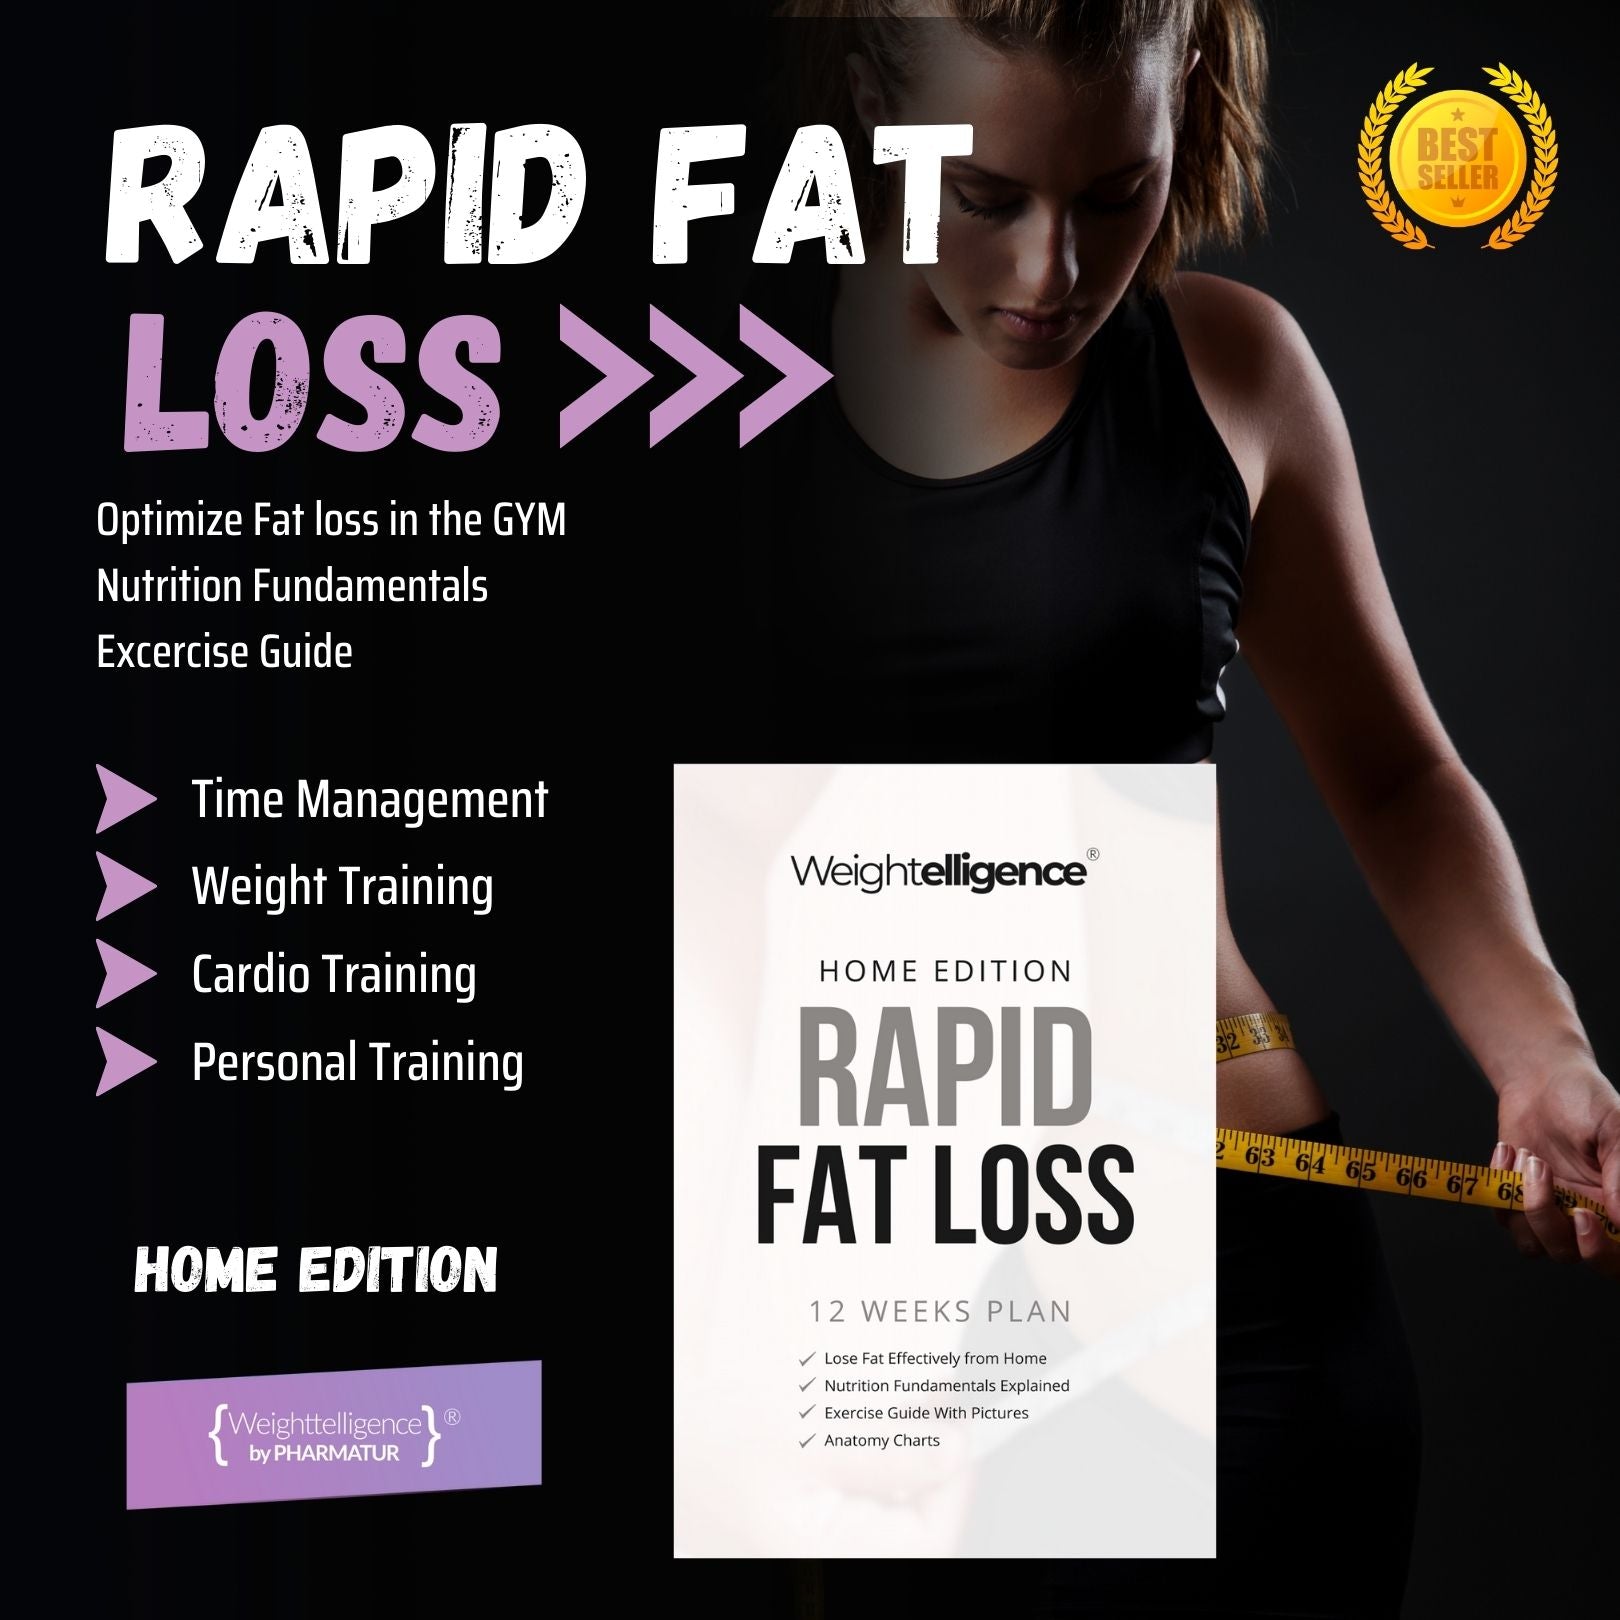 Weightelligence Rapid Fat Loss Home Edition